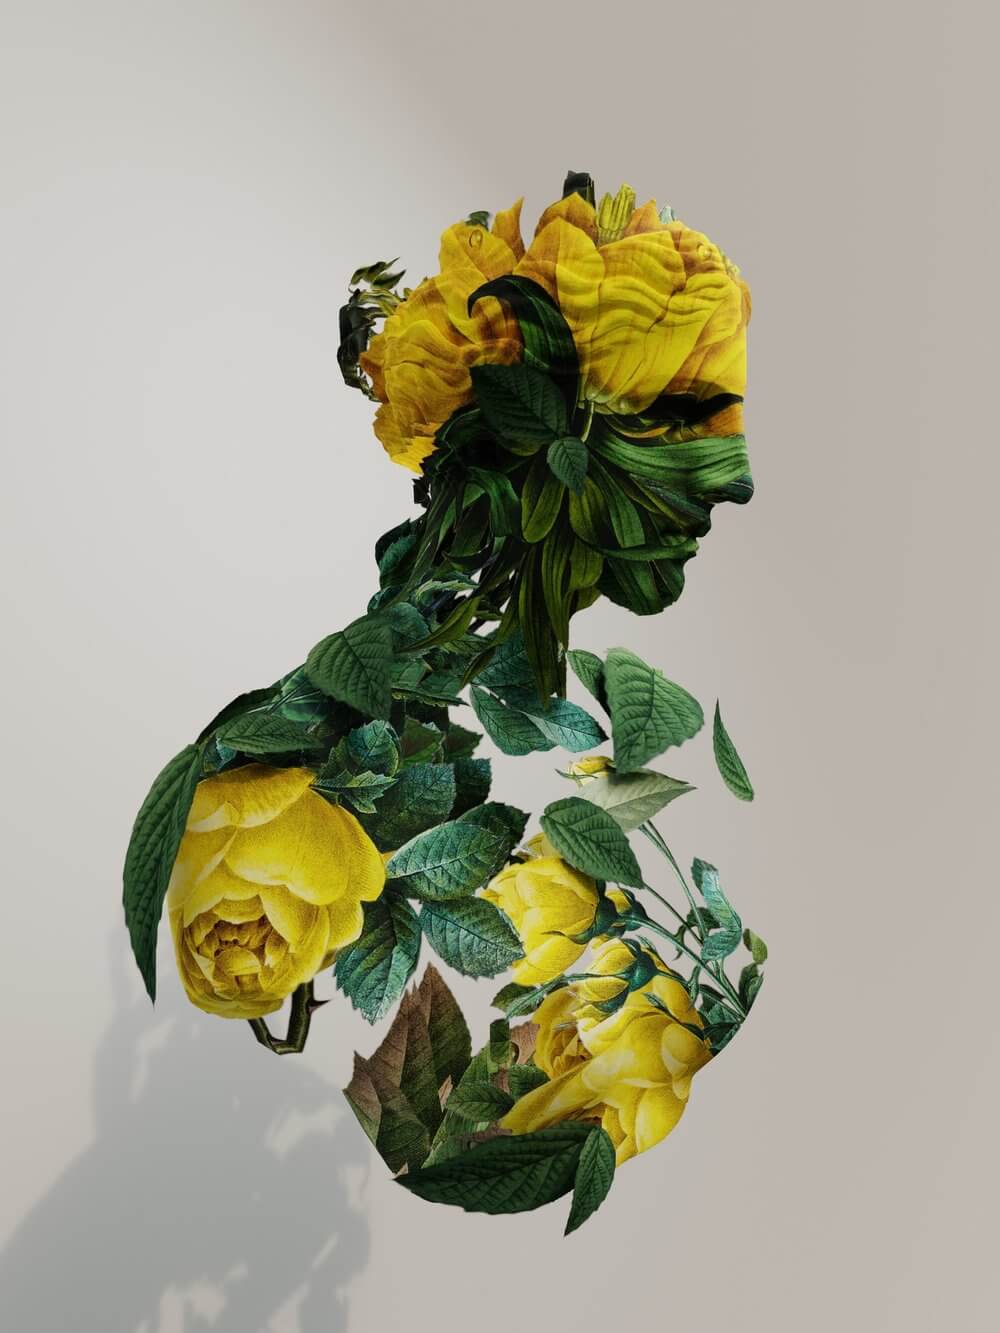 A bust made of yellow flowers.